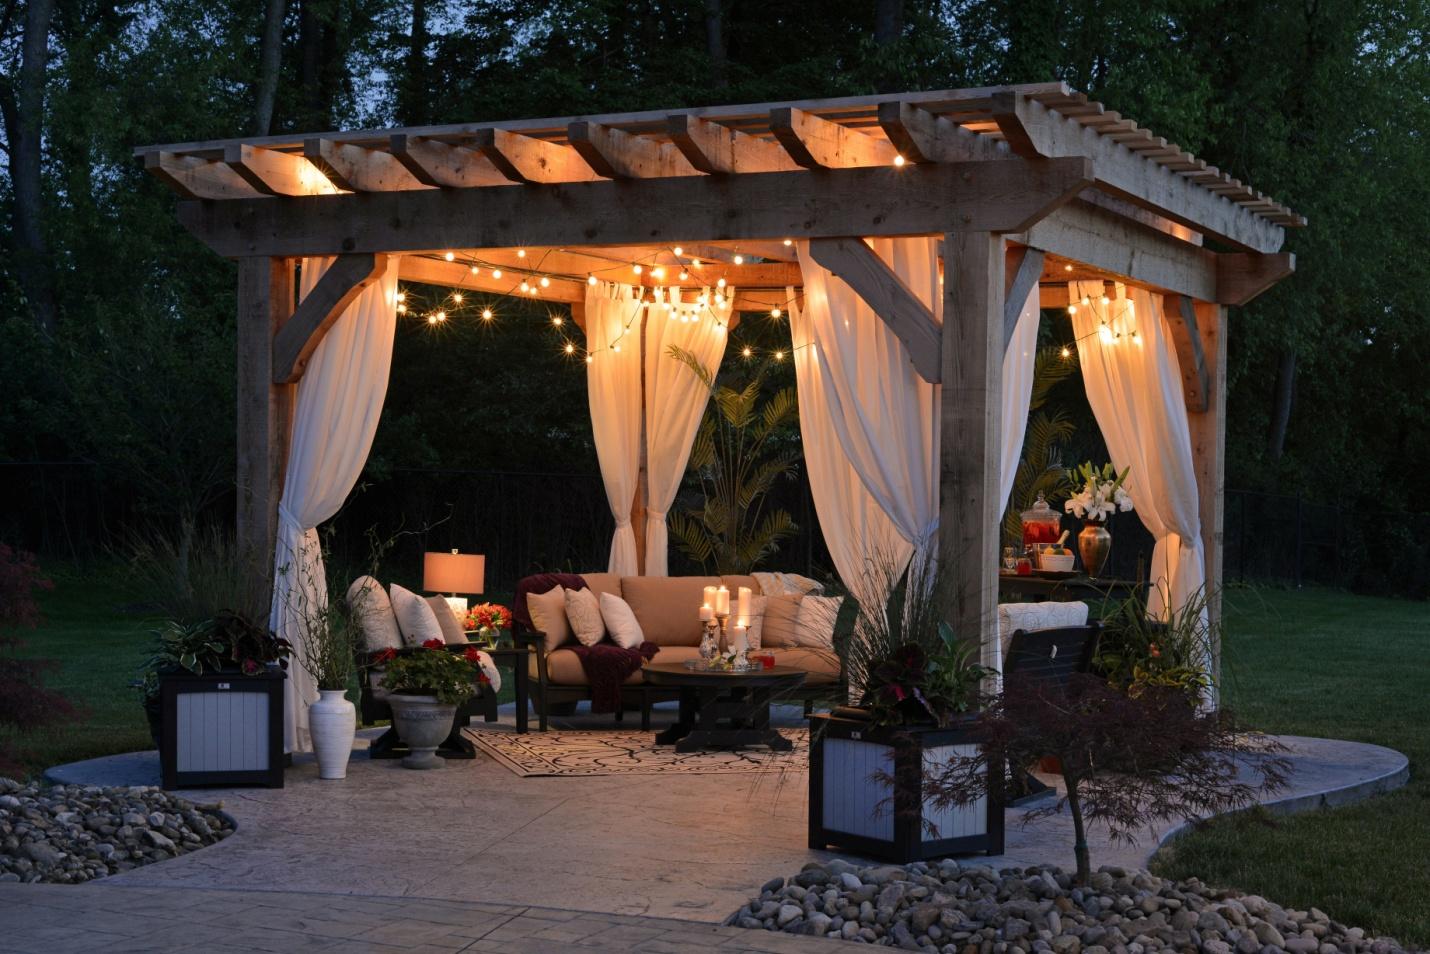 A well-decorated patio with lights and furniture